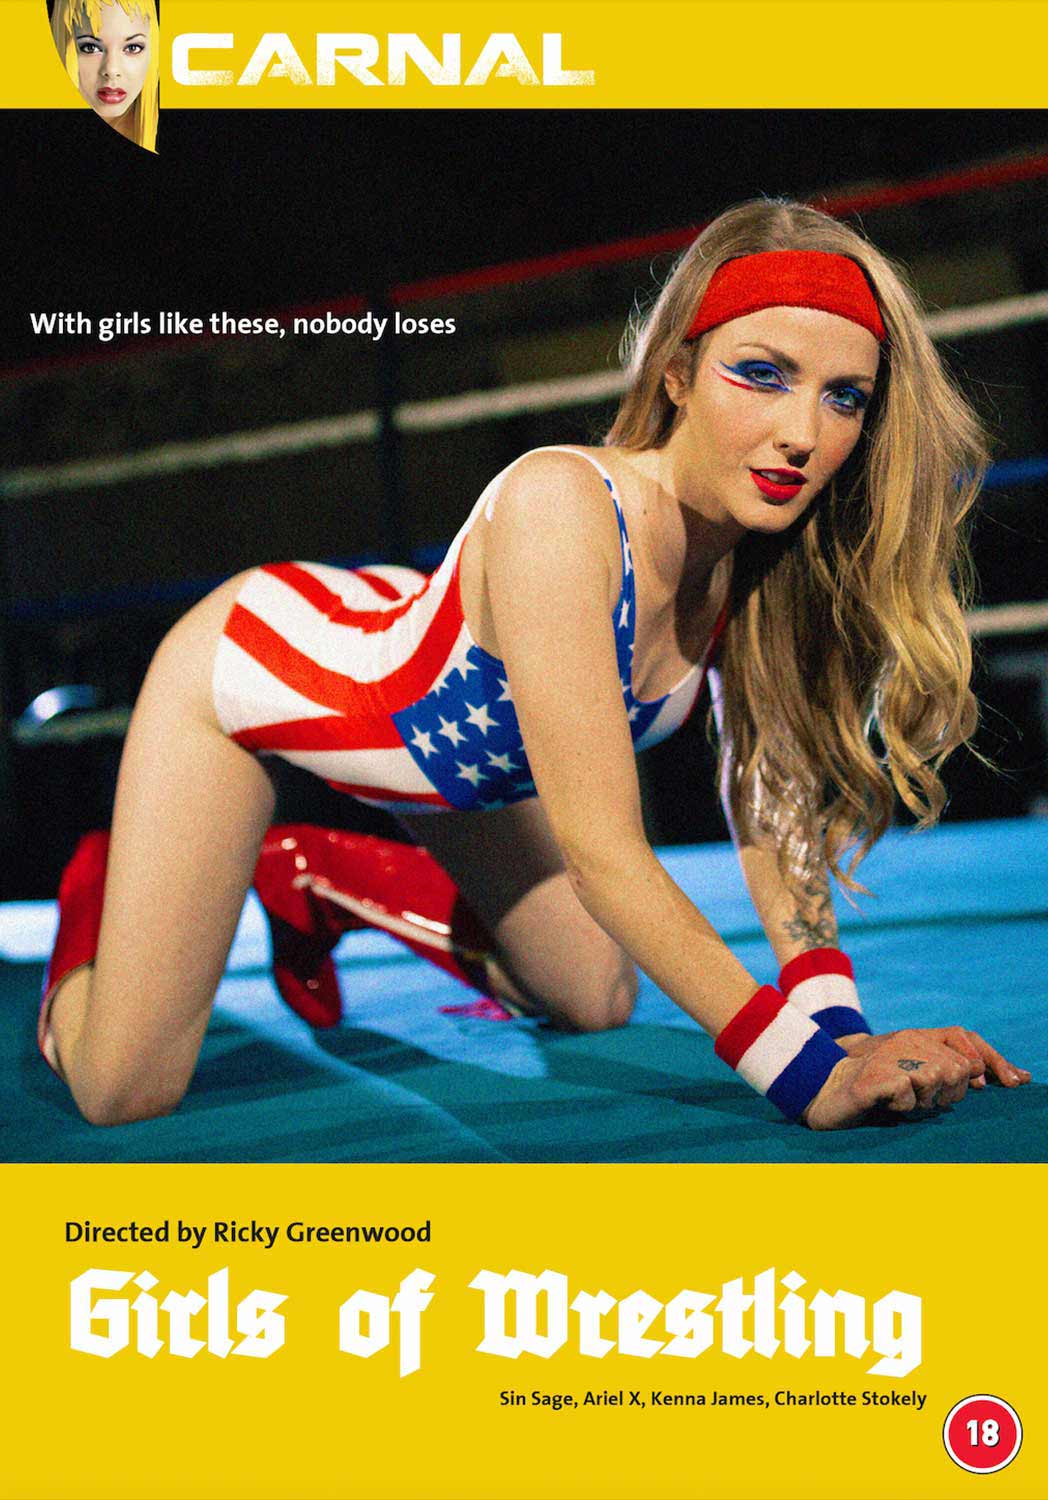 Stream Girls of Wrestling, from Ricky Greenwood, director of Talk Derby to Me and Confessions of a Sinful Nun